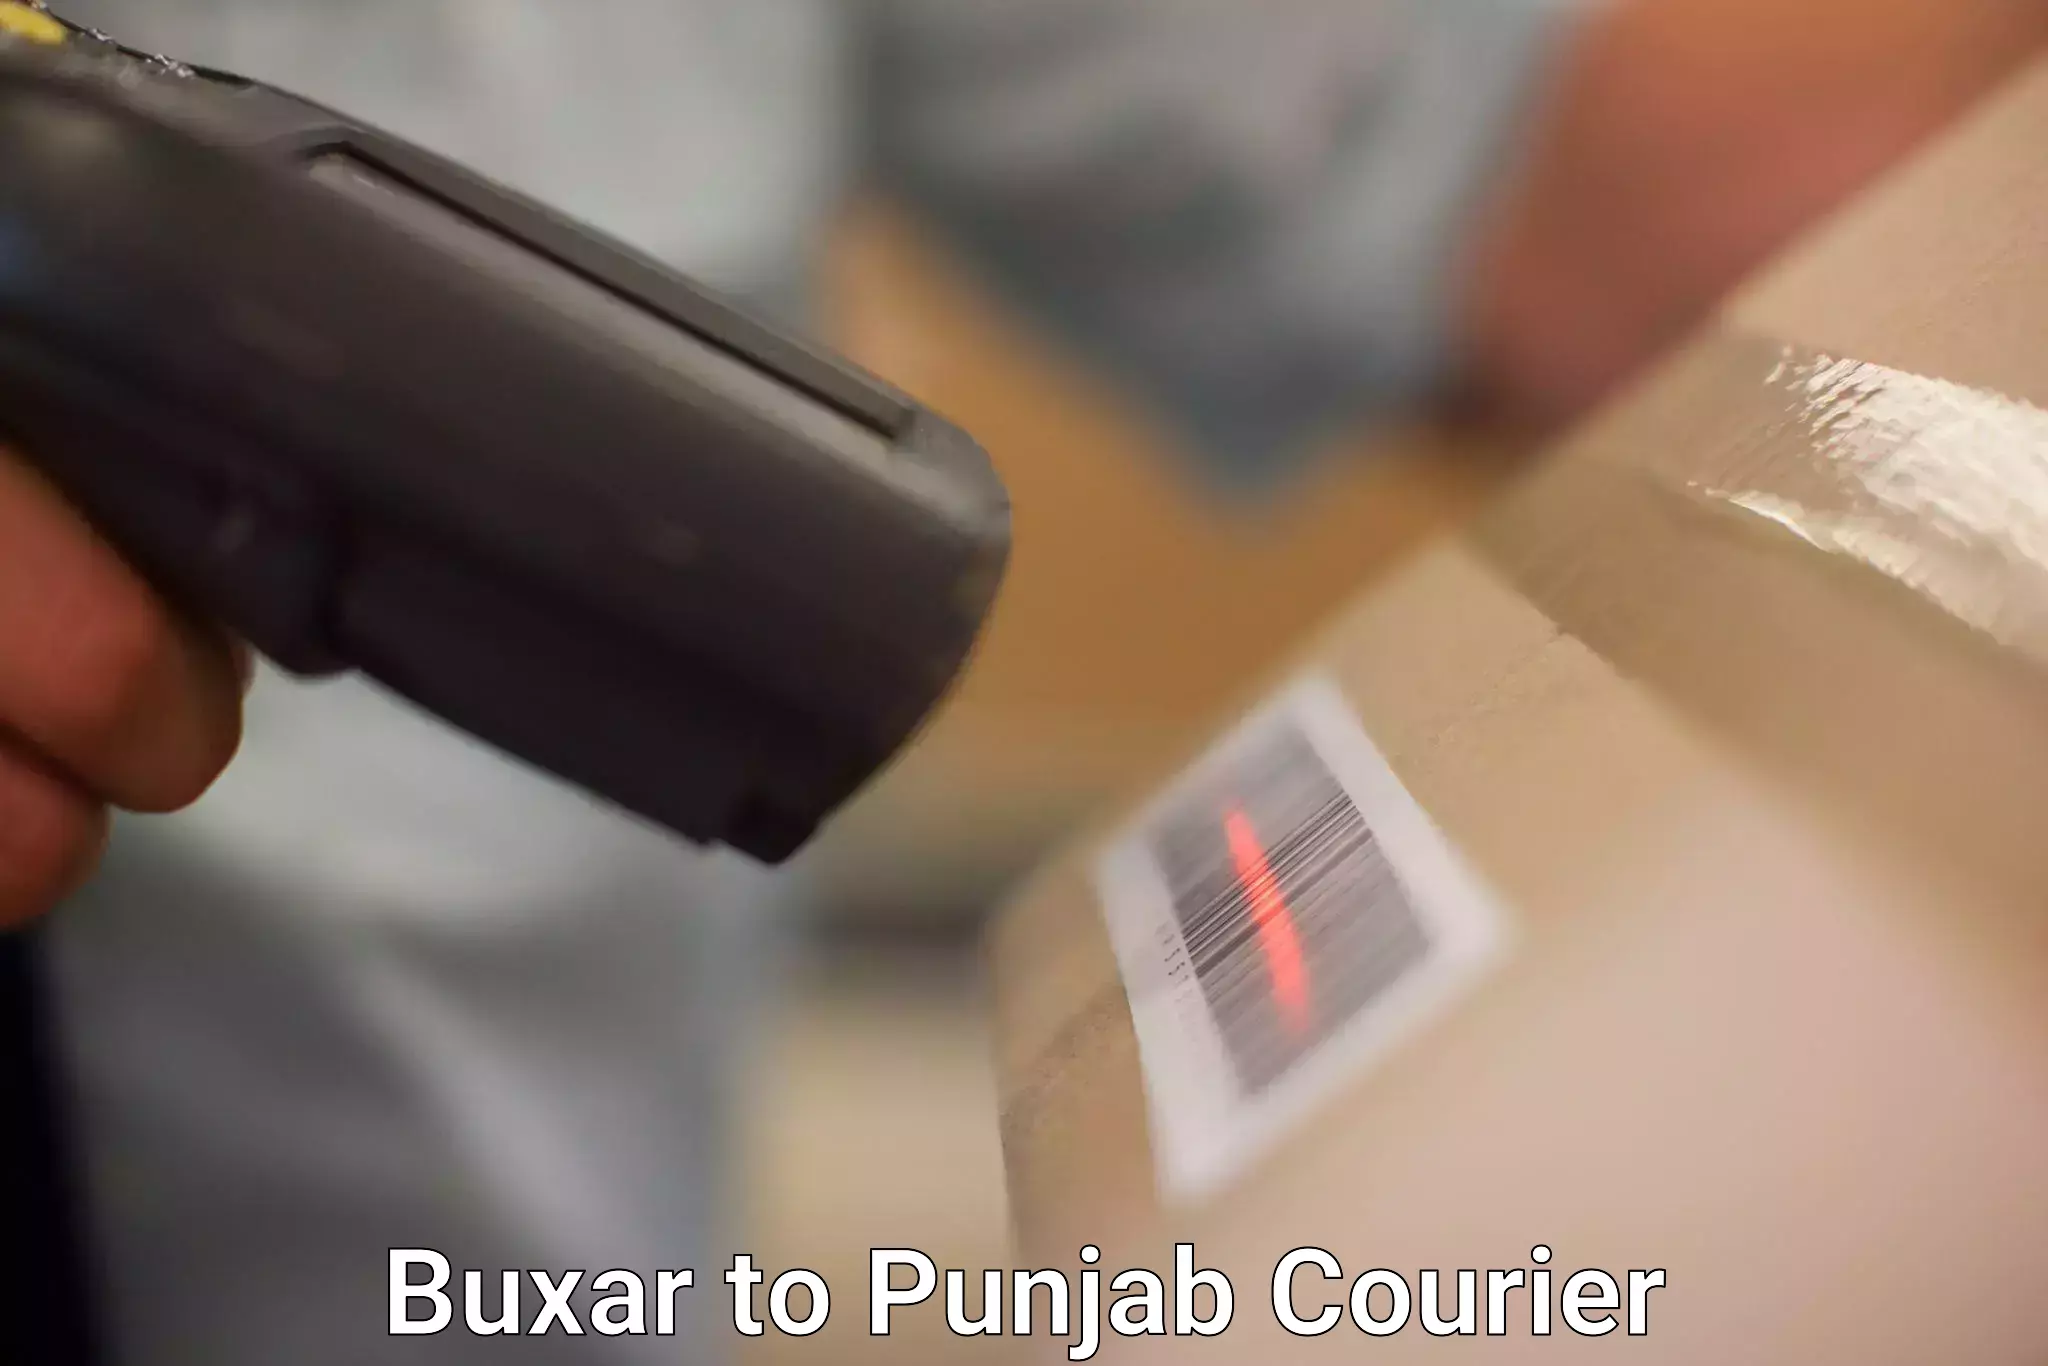 Tech-enabled shipping Buxar to Sirhind Fatehgarh